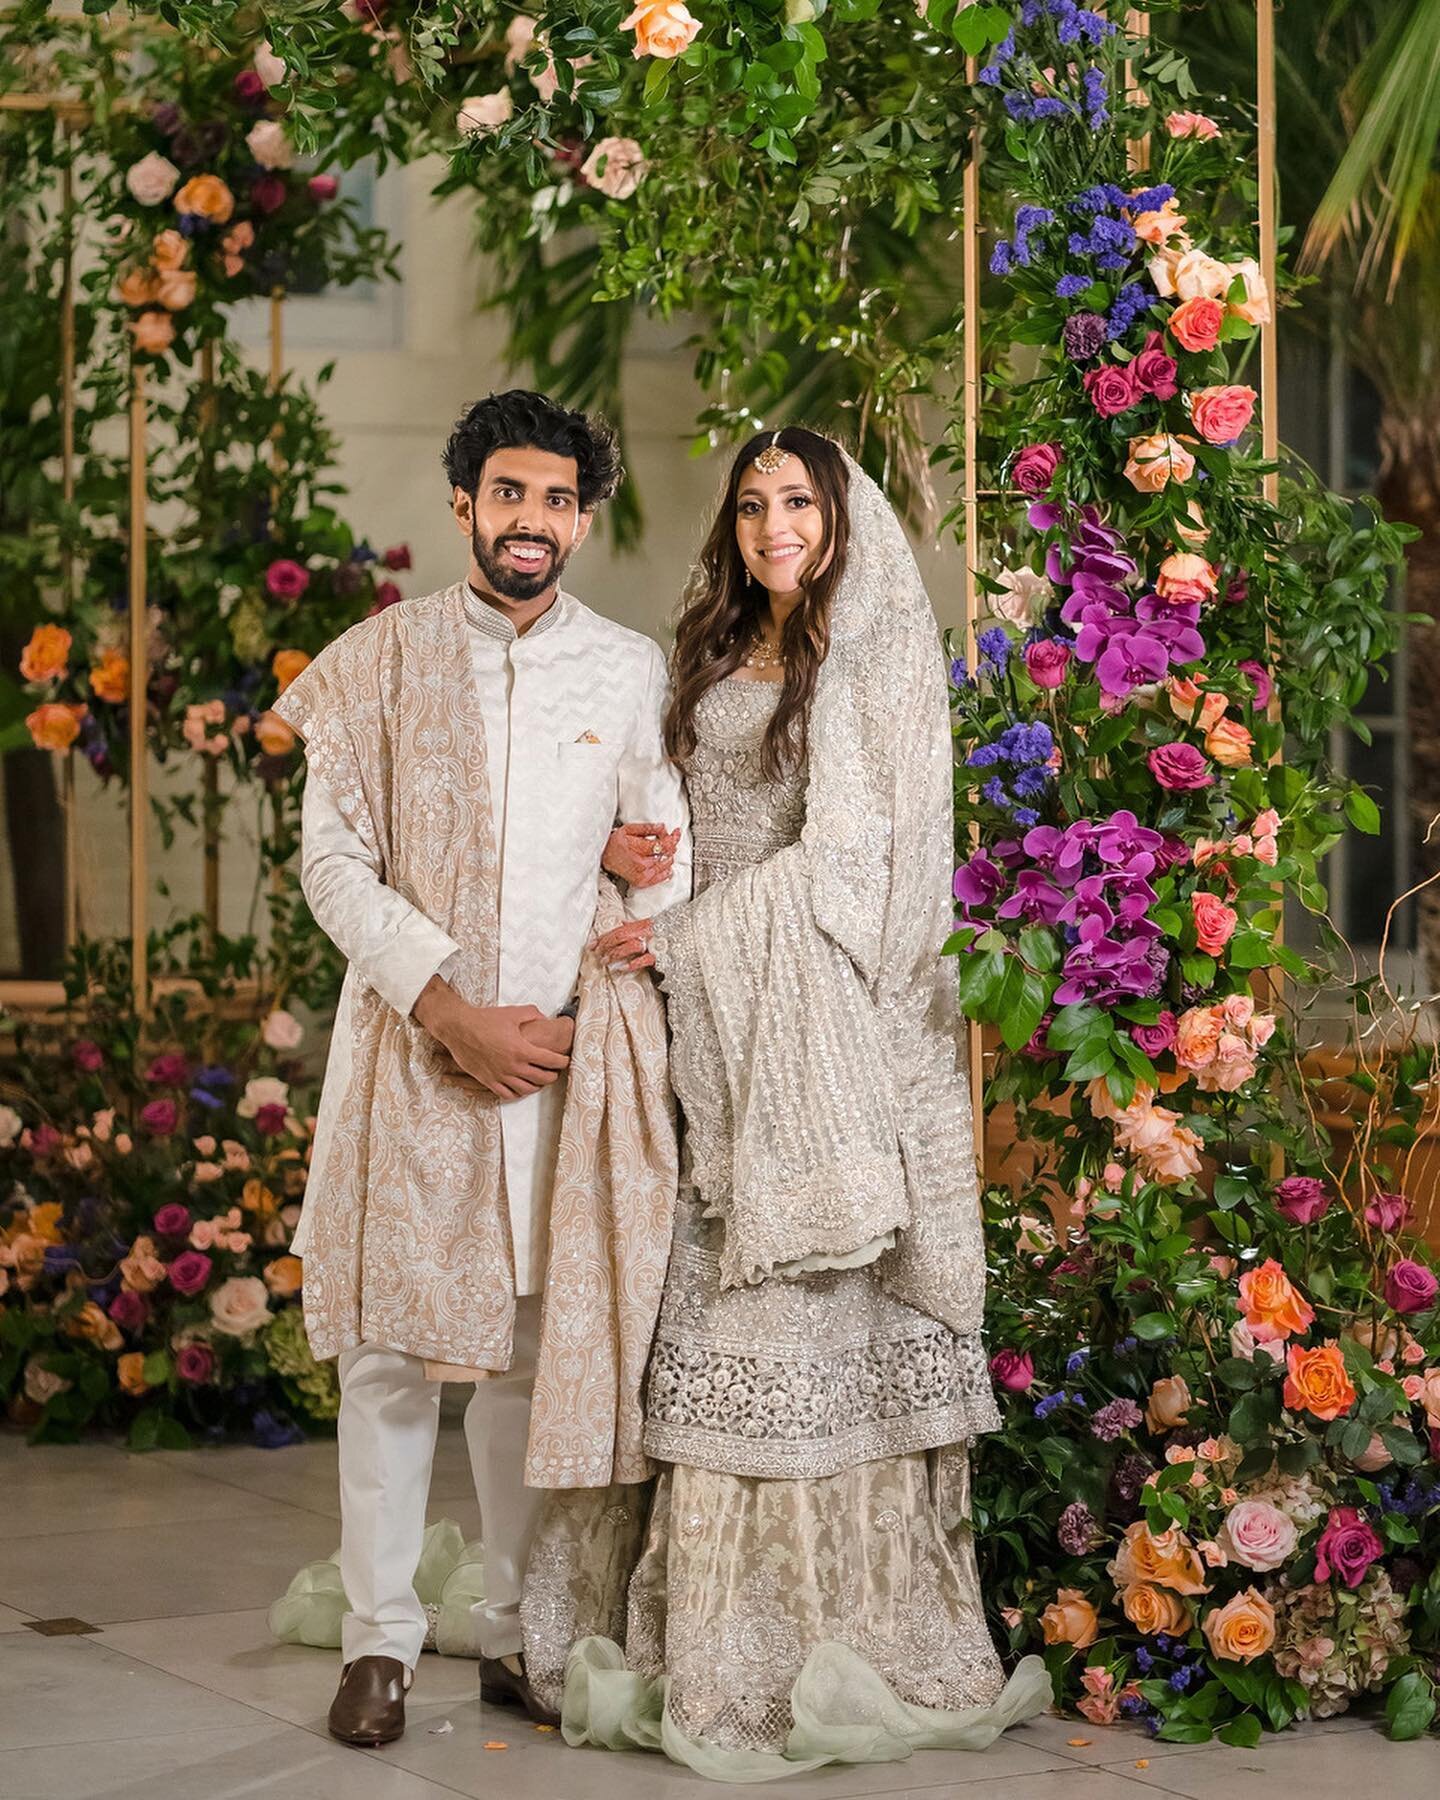 Gorgeous ceremony images from Adeel &amp; Sarah&rsquo;s stunning wedding day. 

Floral: @festivestl 
Photo: @raypropstudios 
Mandap/Rentals: @fatimadesigns 
Venue: @towergrovepark